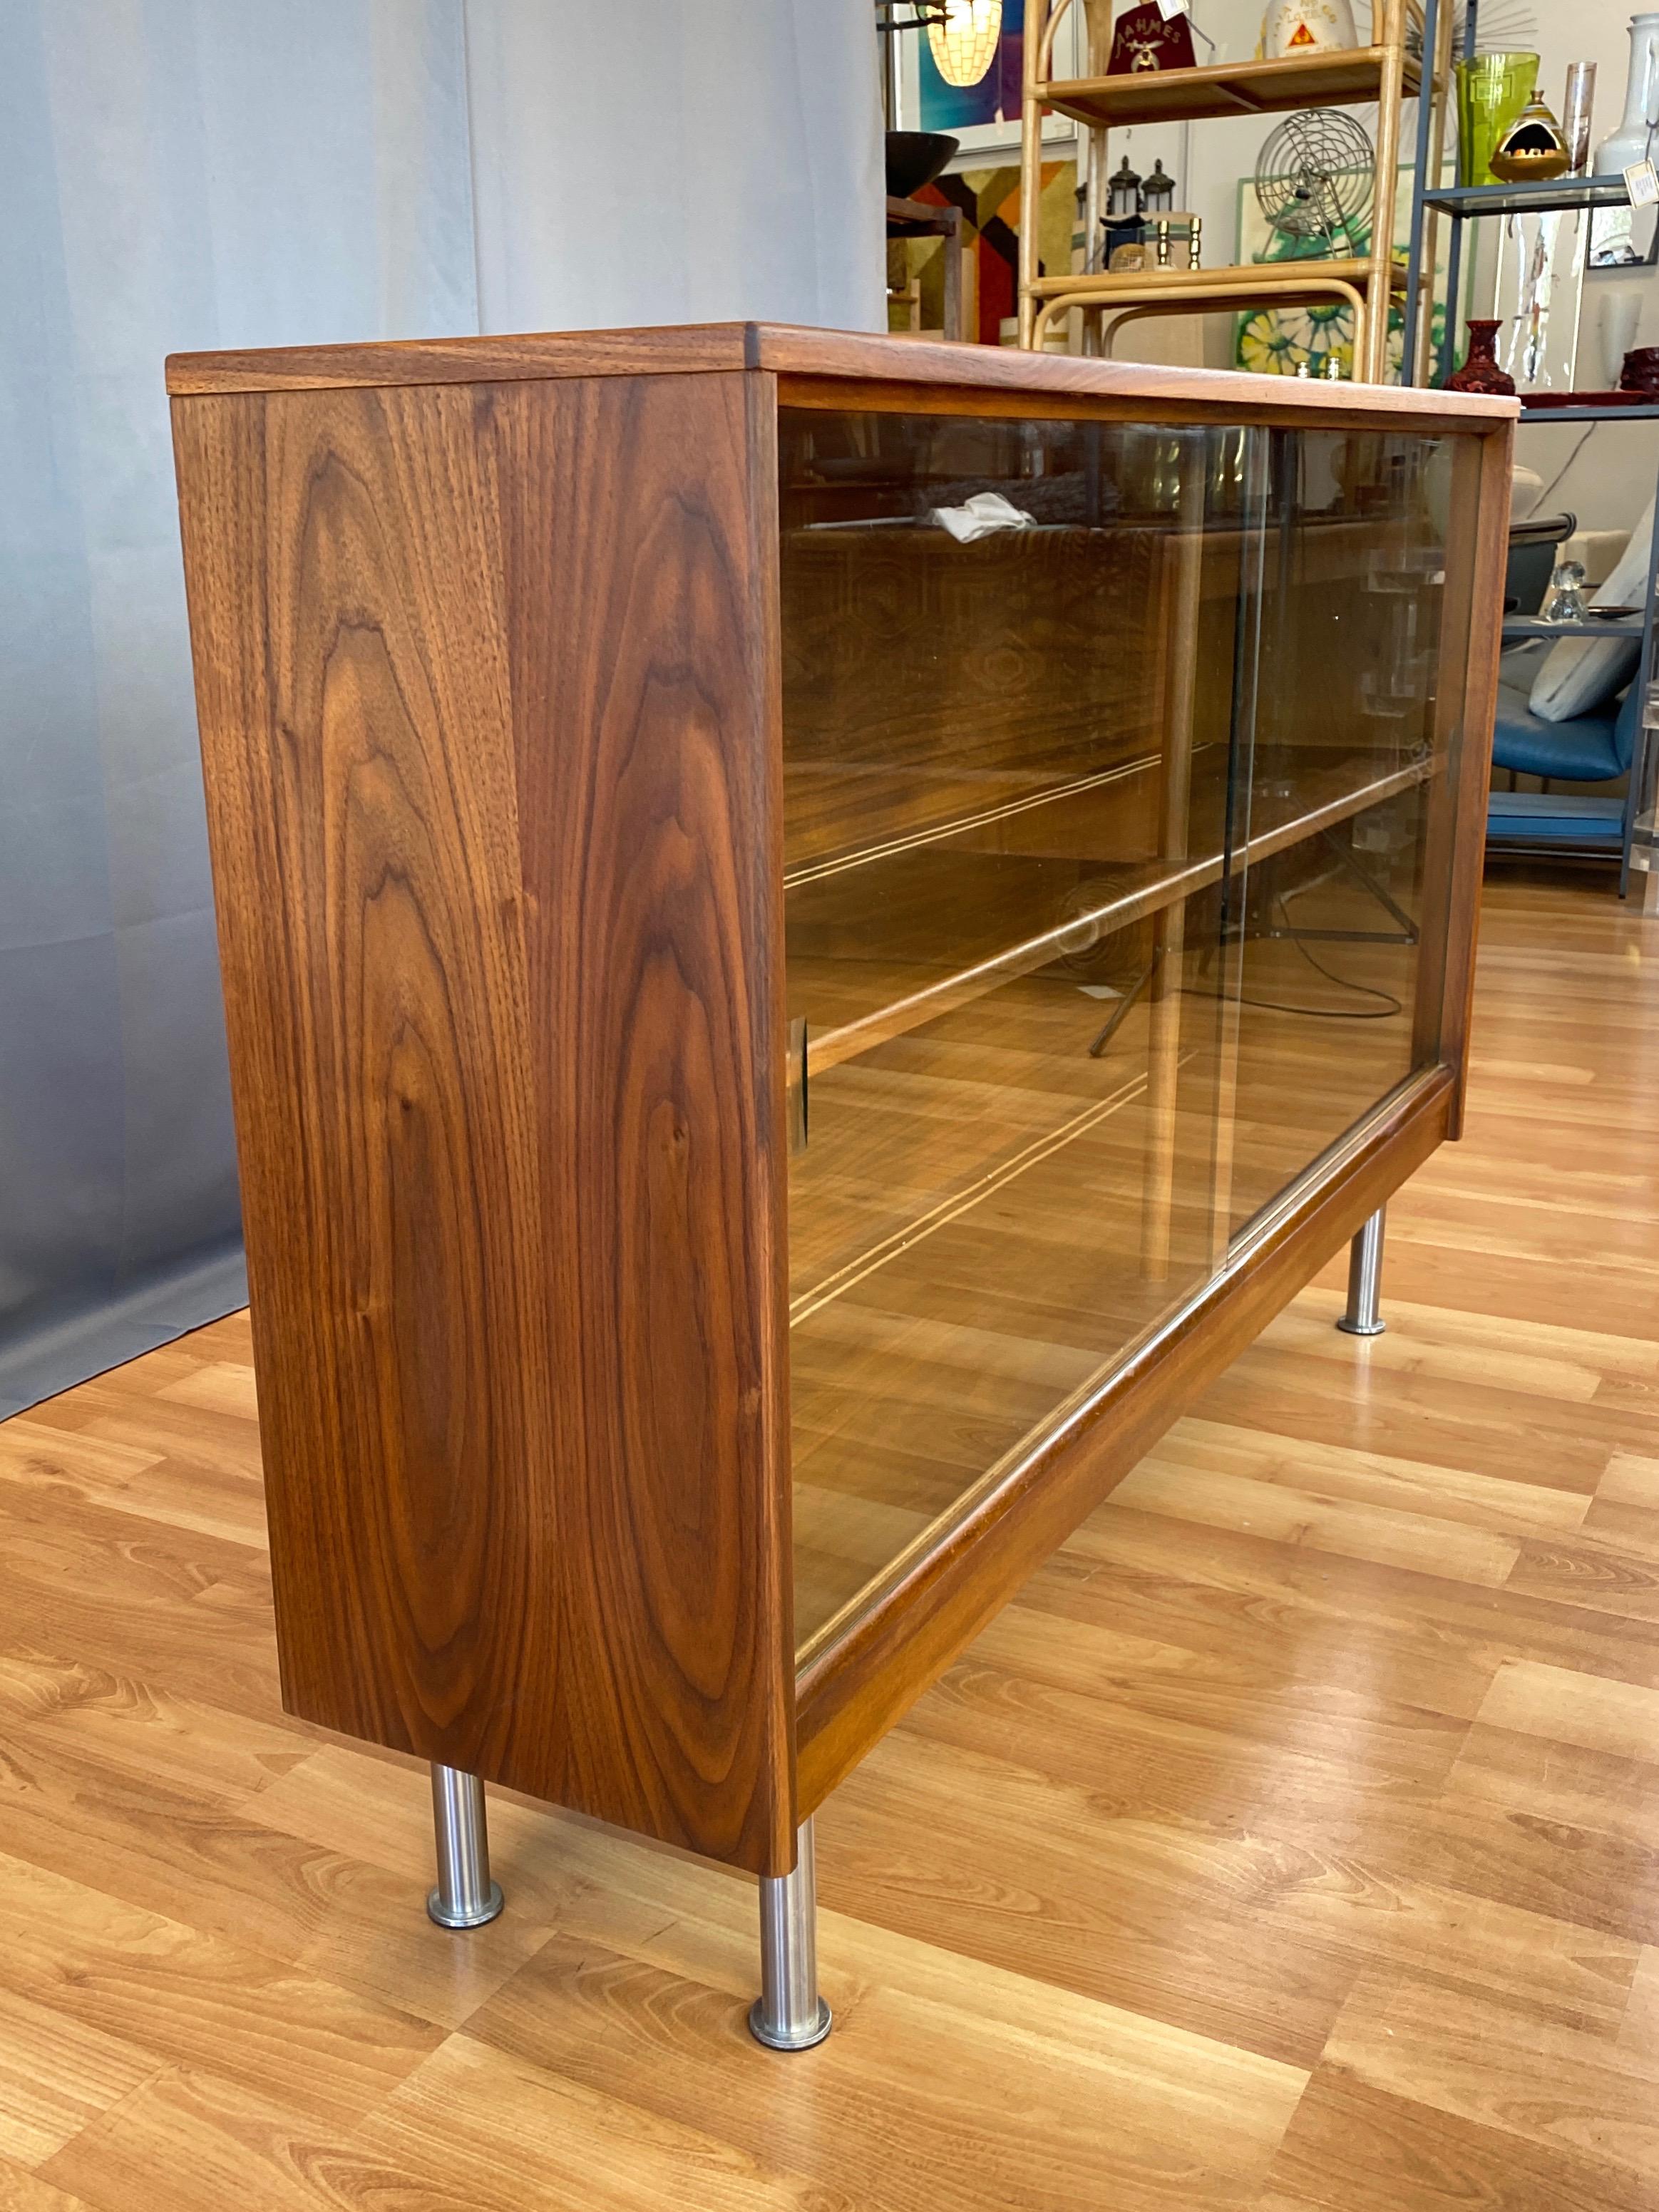 Mid-20th Century Mid-Century Modern Walnut Cabinet or Bookcase with Sliding Glass Doors, 1960s